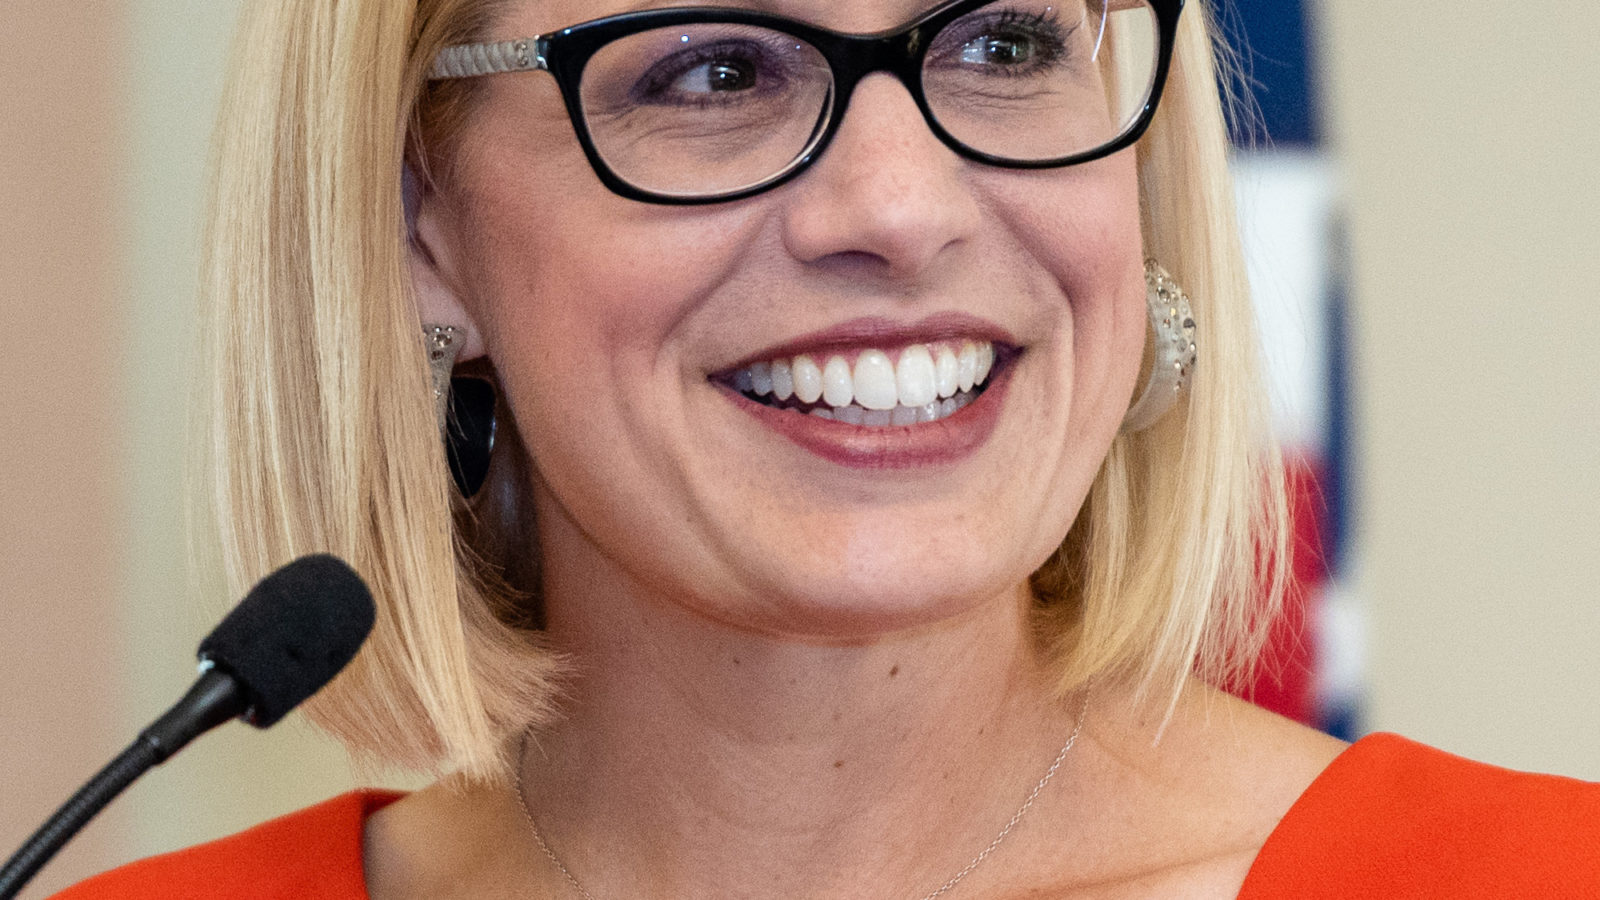 What Both Parties Can Learn From Democrat Kyrsten Sinema